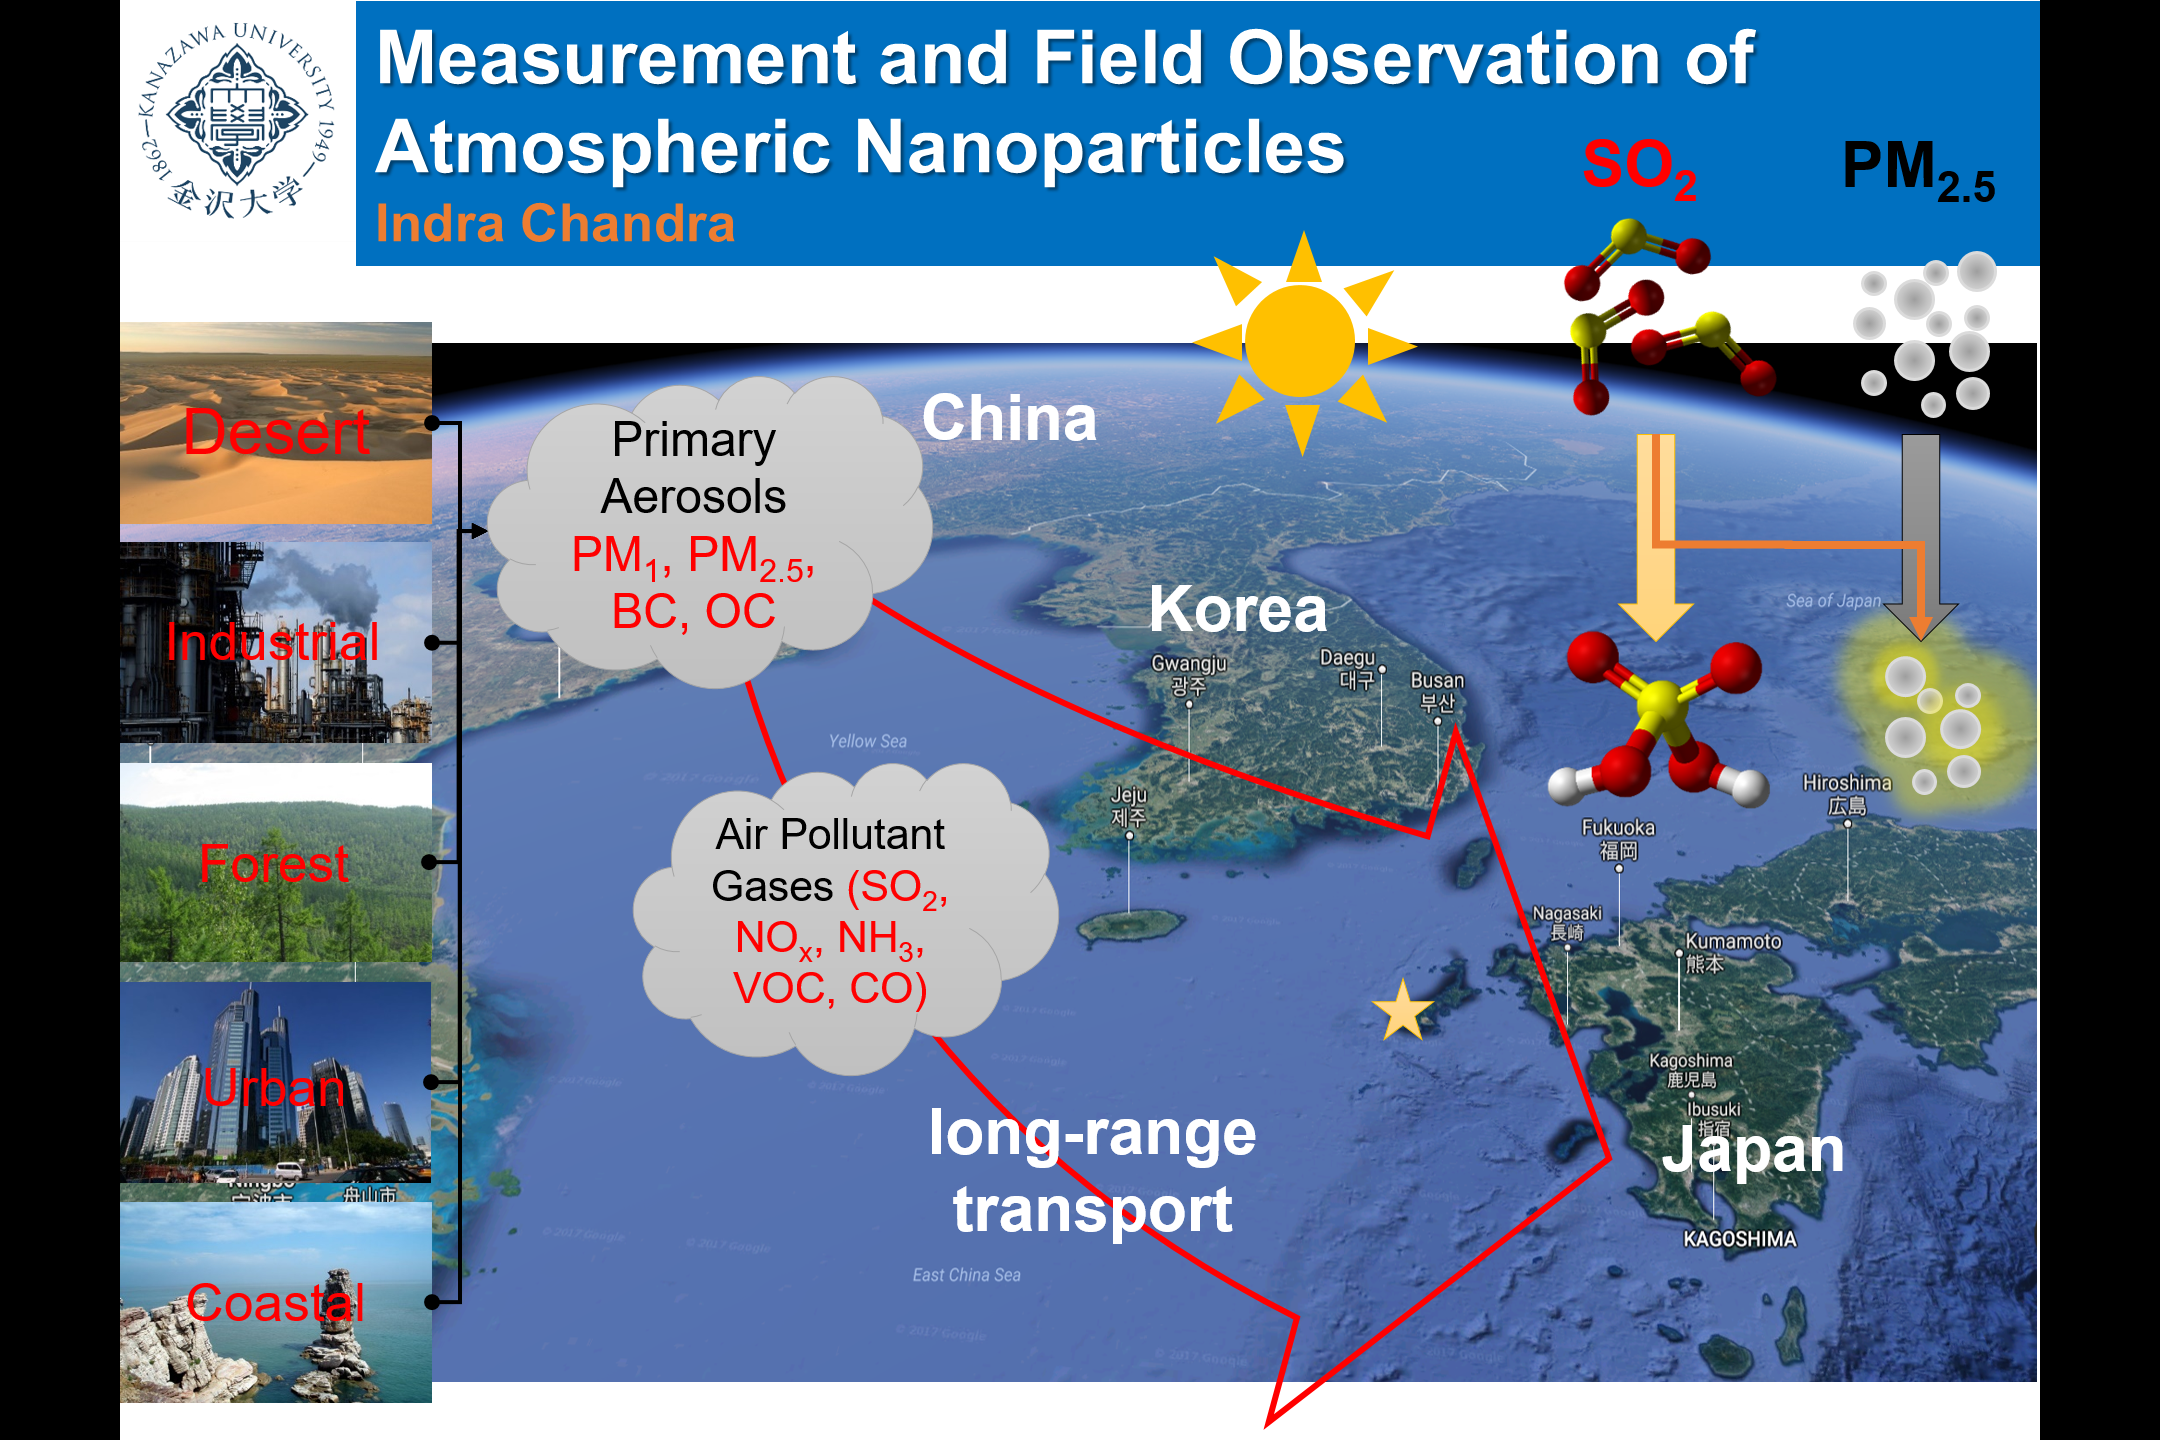 Measurement and field observation of atmospheric nanoparticles